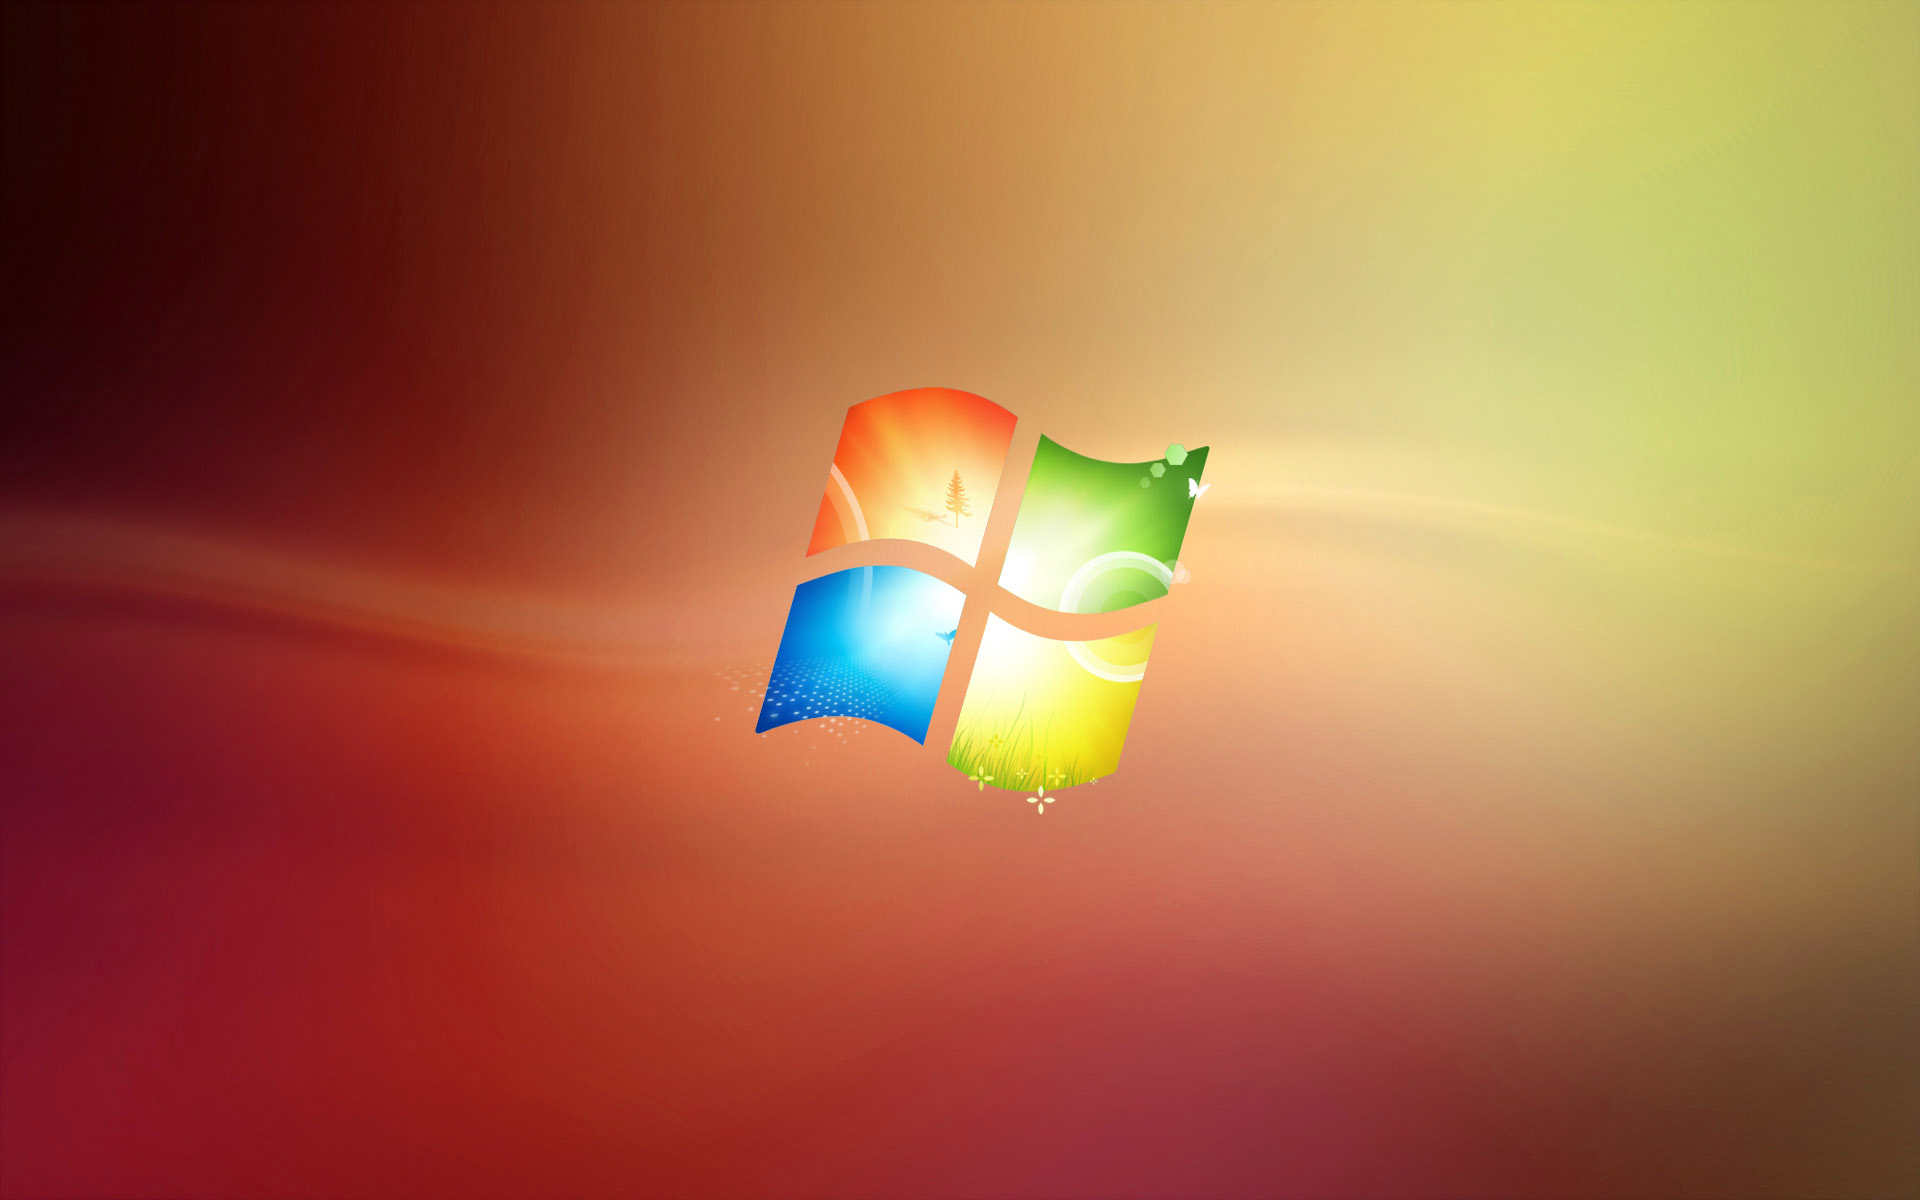 Windows 7 Backgrounds Themes